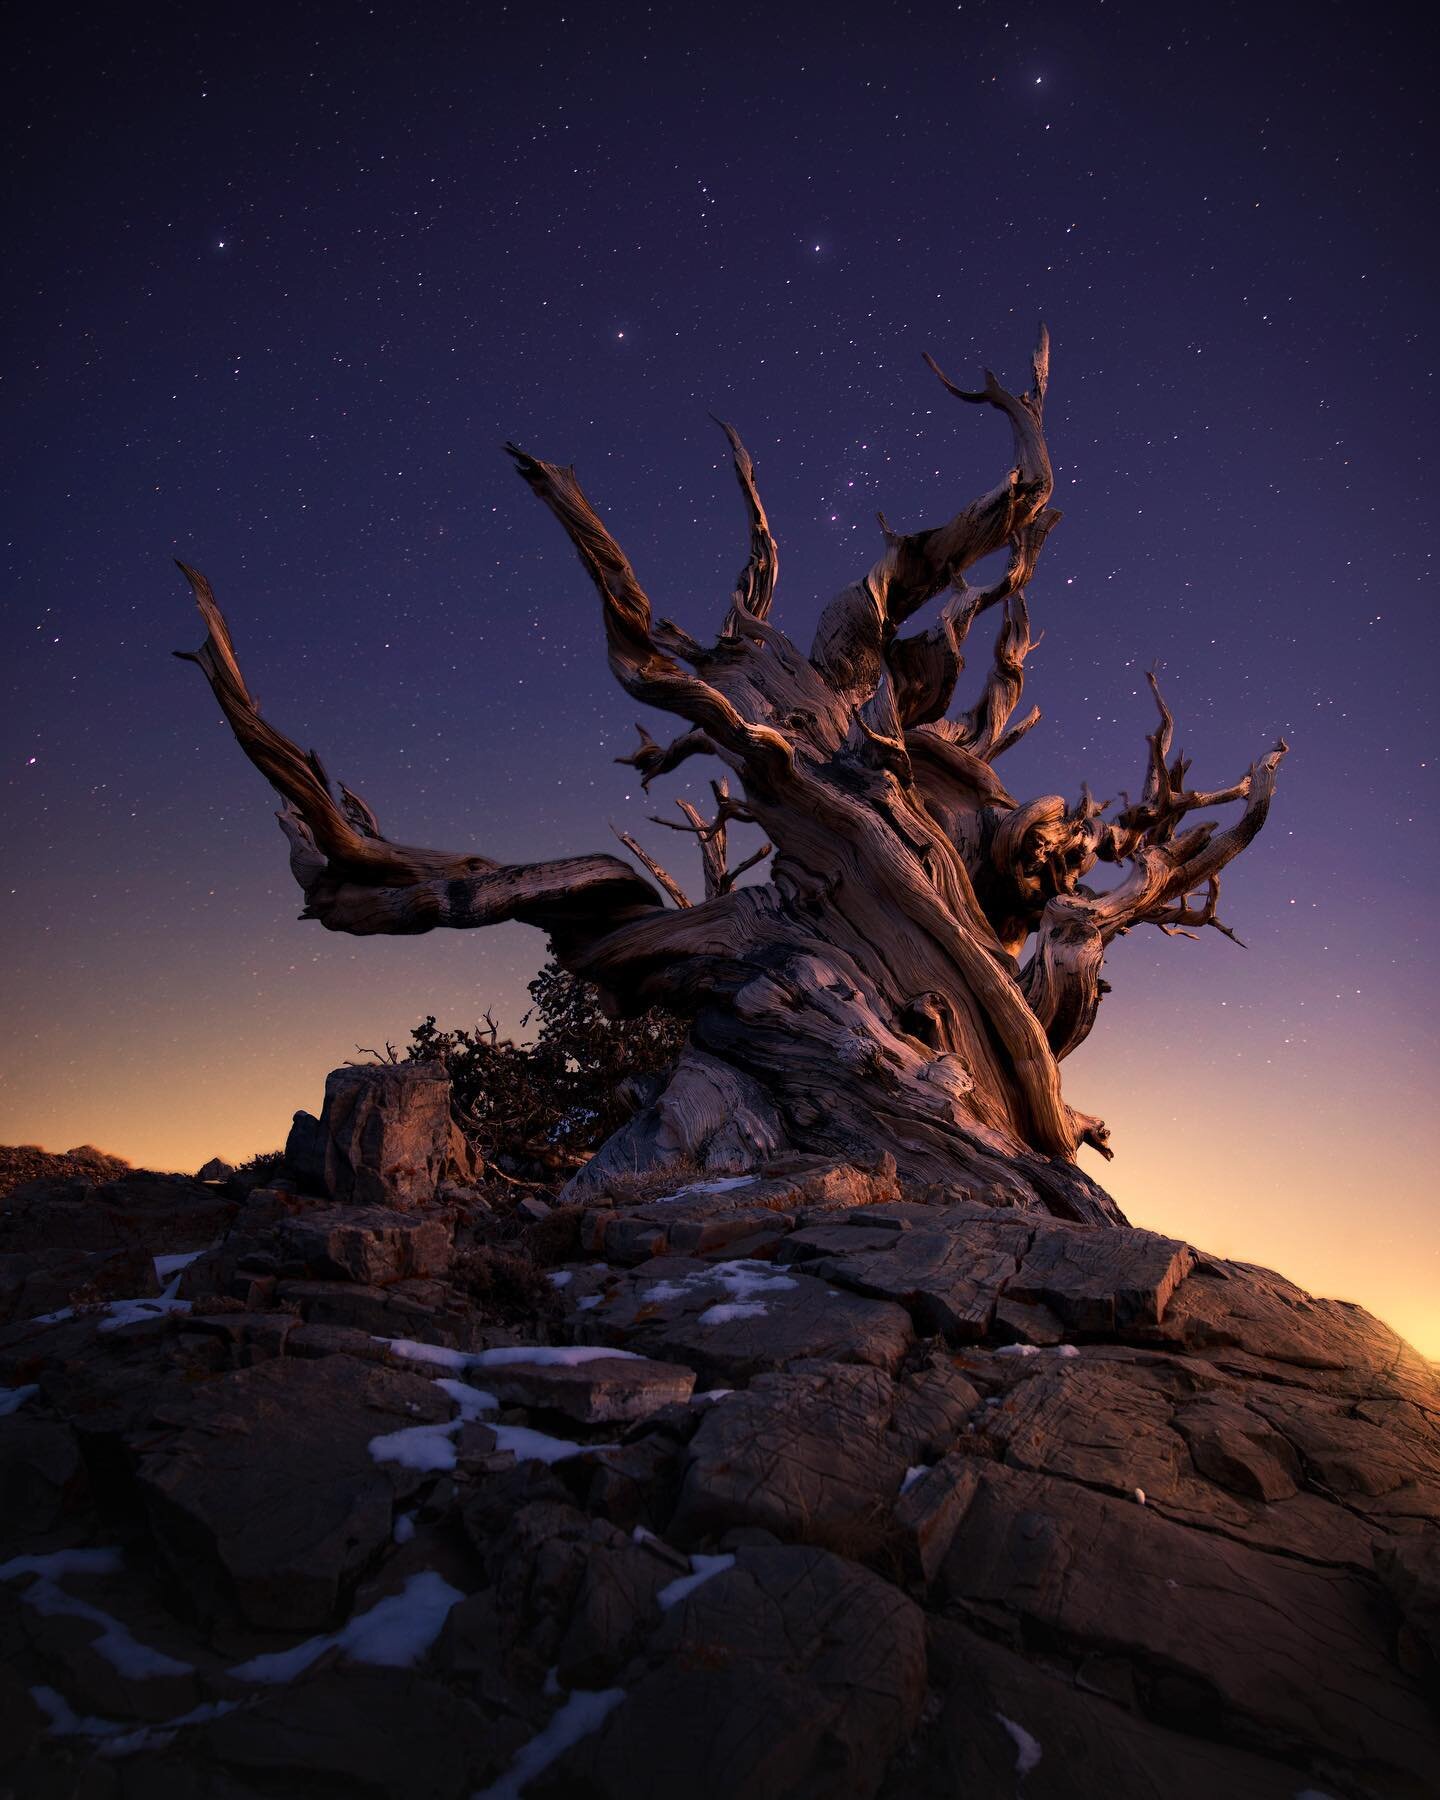 Can you believe this tree is several thousand years old? These bristle cone pines are amongst the oldest non-clonal trees in tbe world. The oldest, Methuselah, is almost 5000 years old! 
.

I was looking through my pictures the other day and came acr